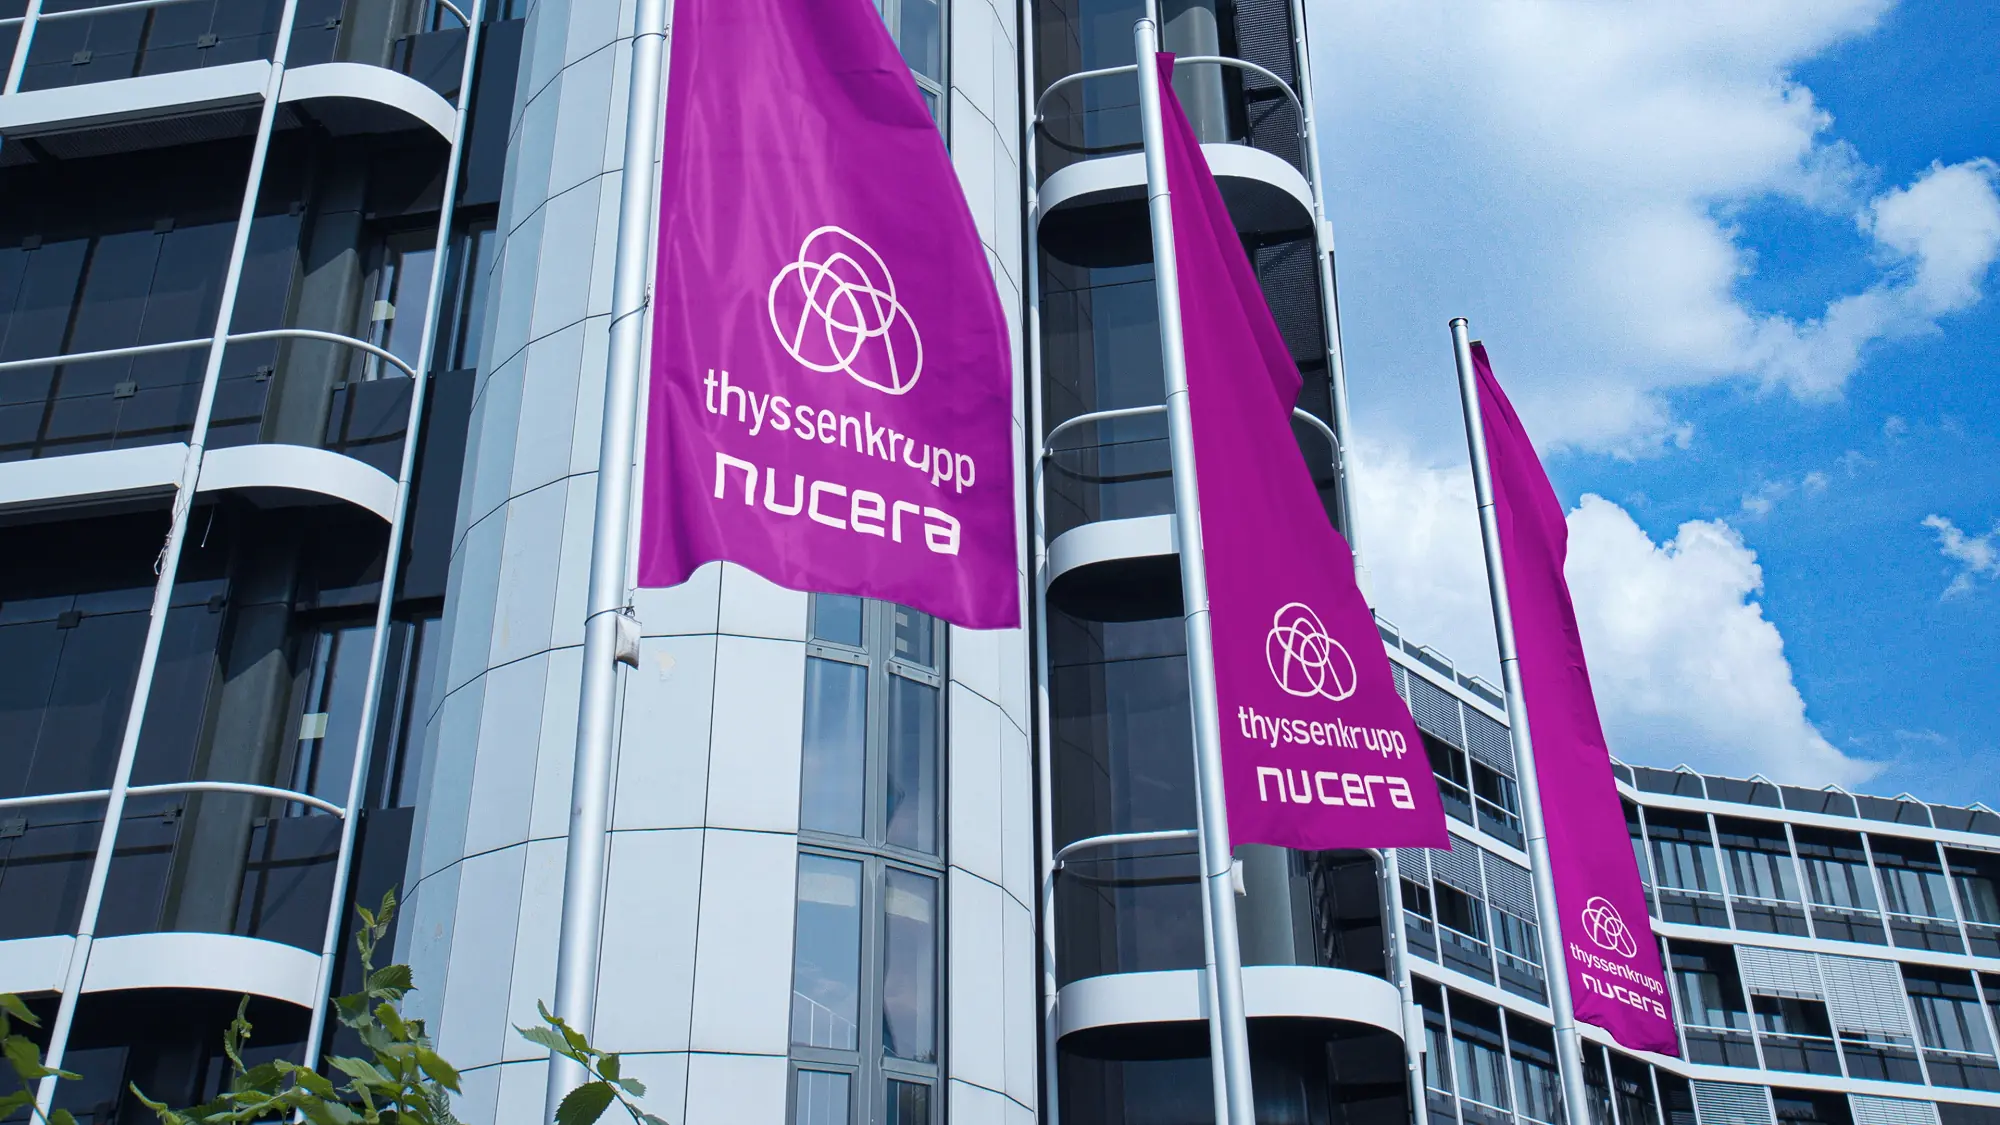 Fot. Headquarters-with-flags_thyssenkrupp-nucera